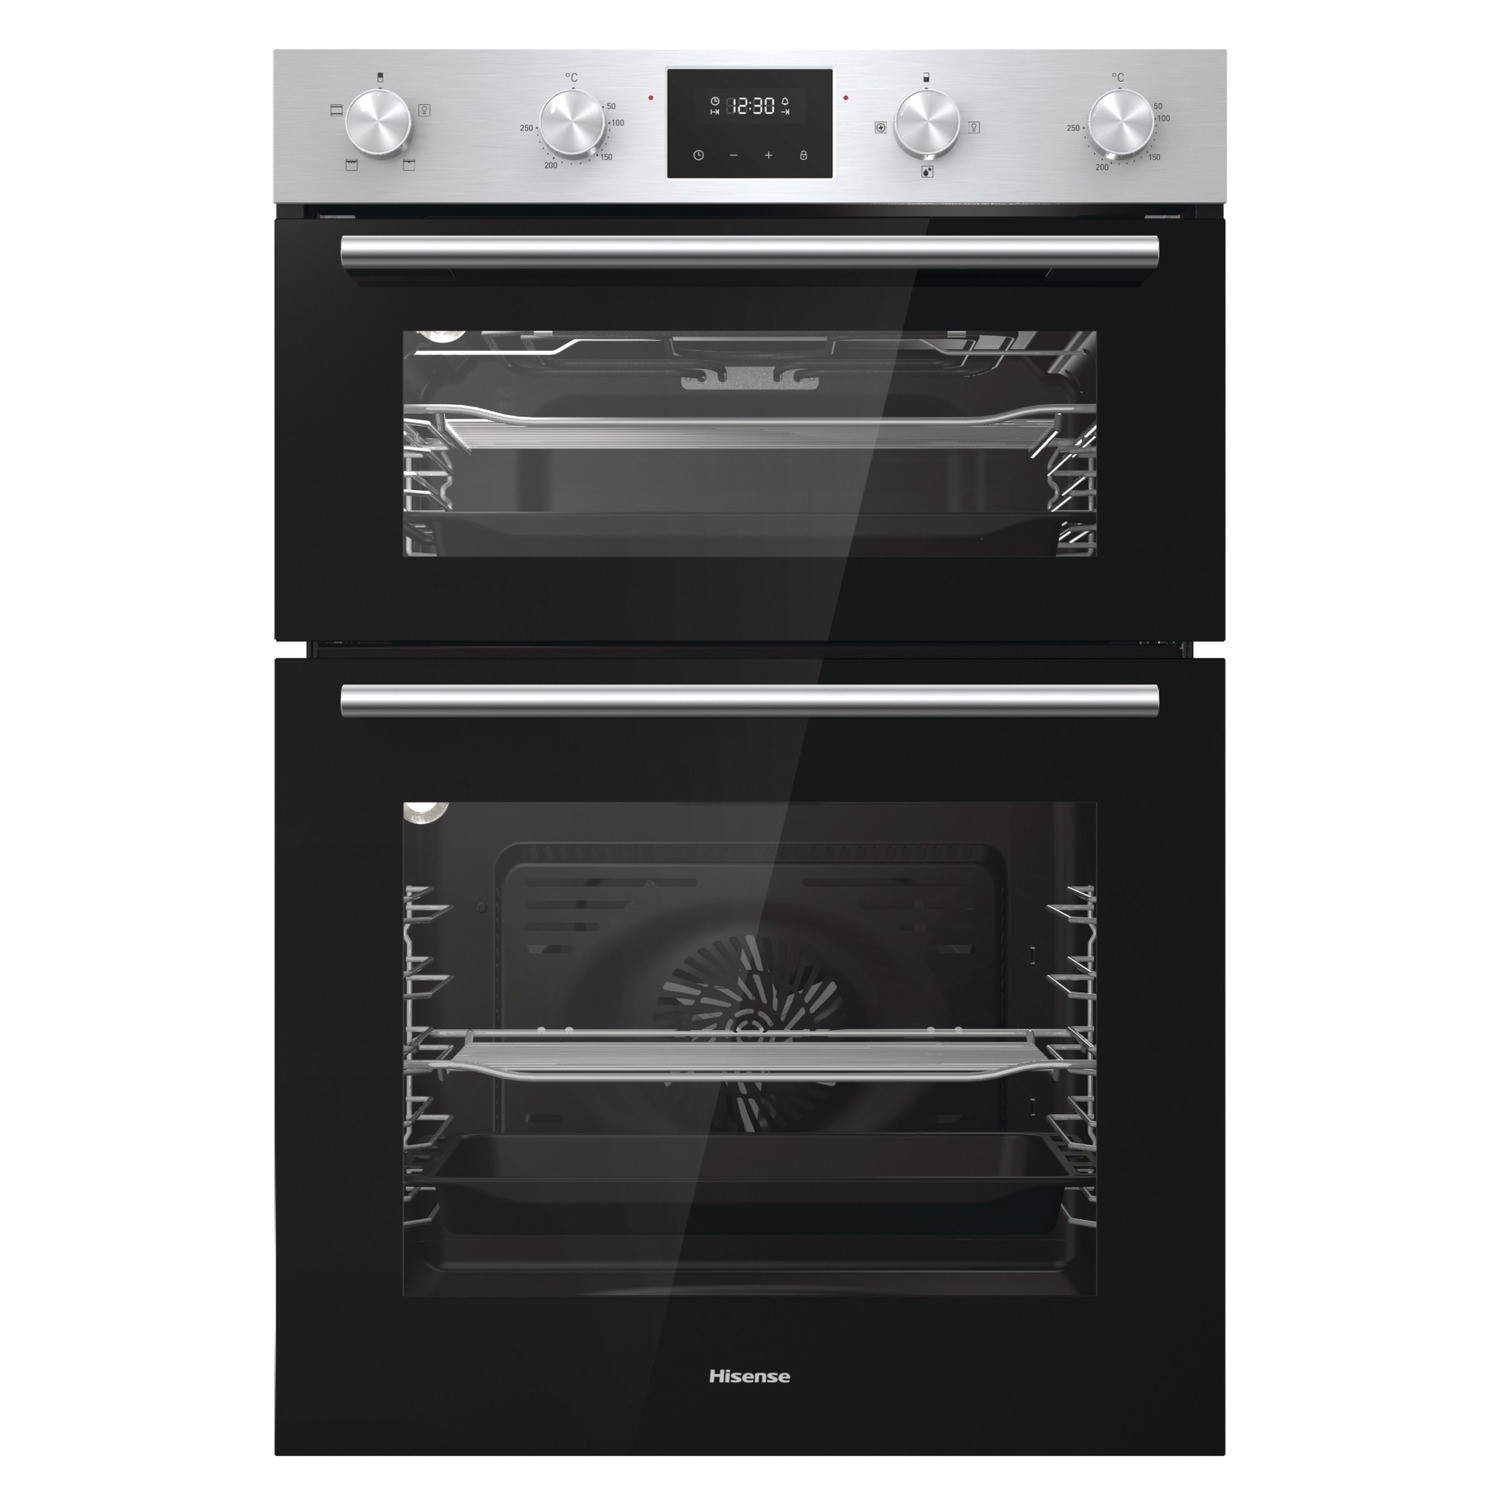 Refurbished Hisense BID95211XUK 60cm Double Built-In Electric Oven Stainless Steel